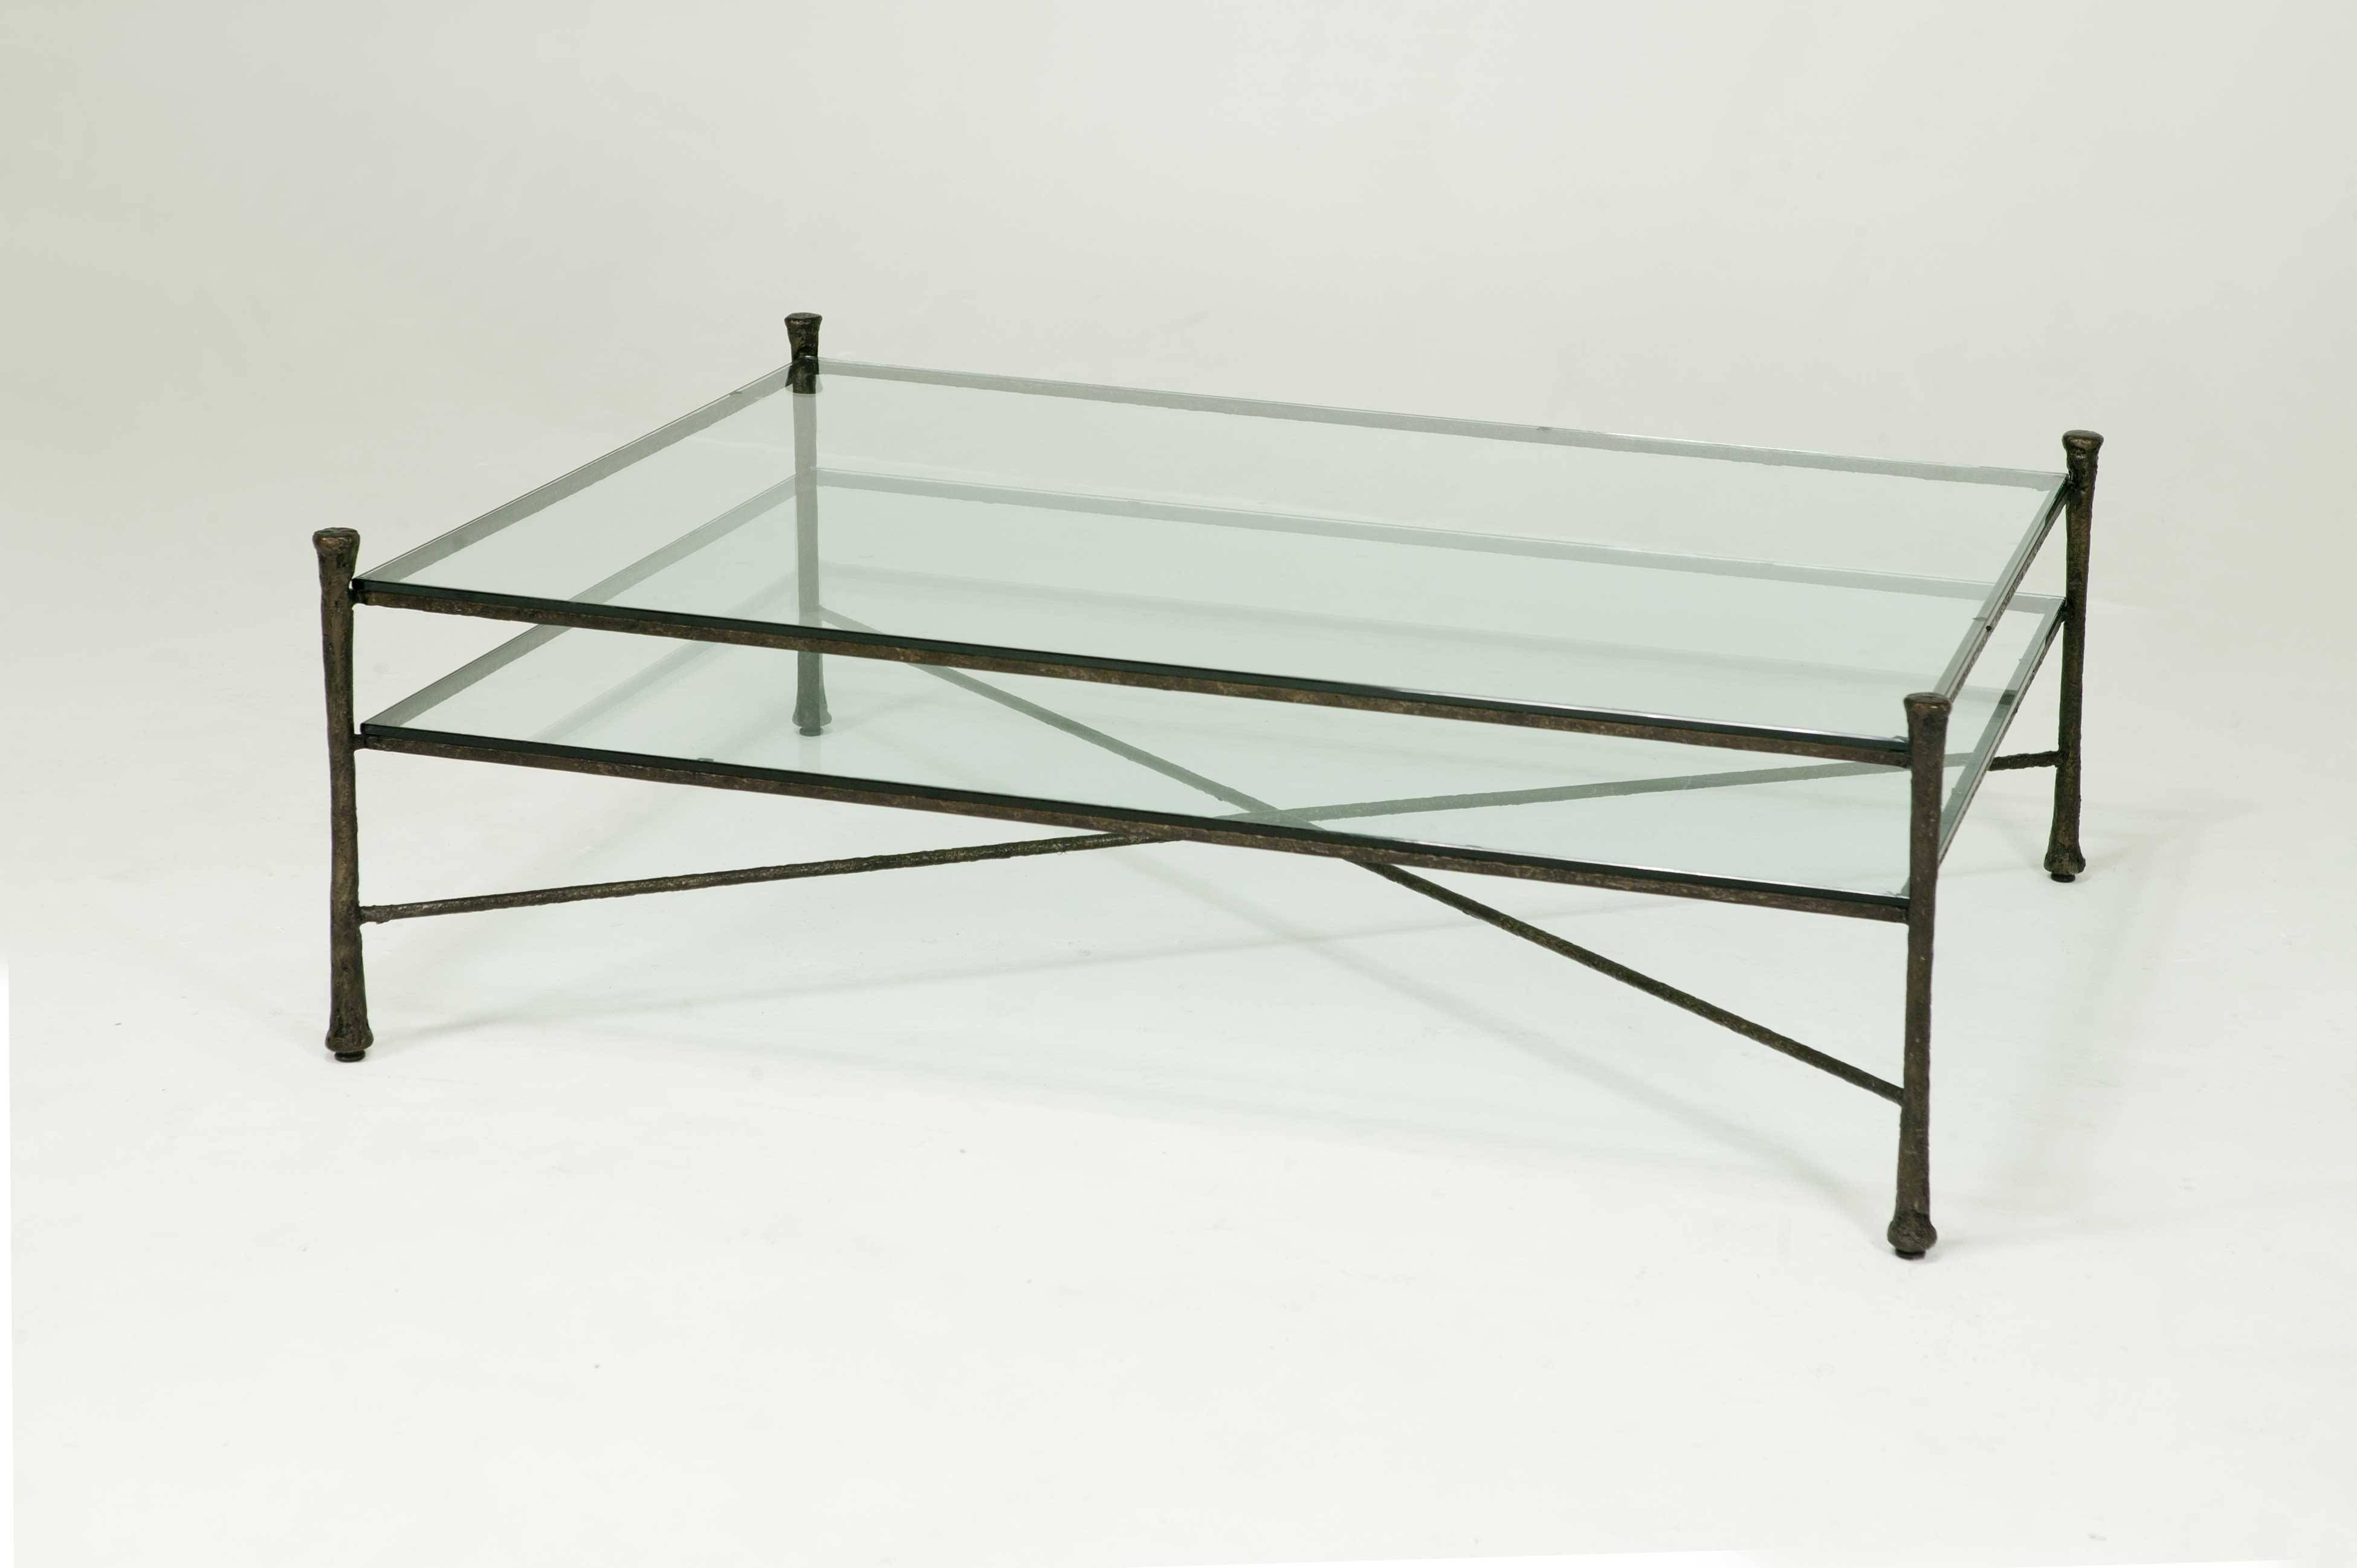 Black Metal Coffee Table With Glass Top | Coffee Tables Decoration In Metal Coffee Tables With Glass Top (Photo 5 of 31)